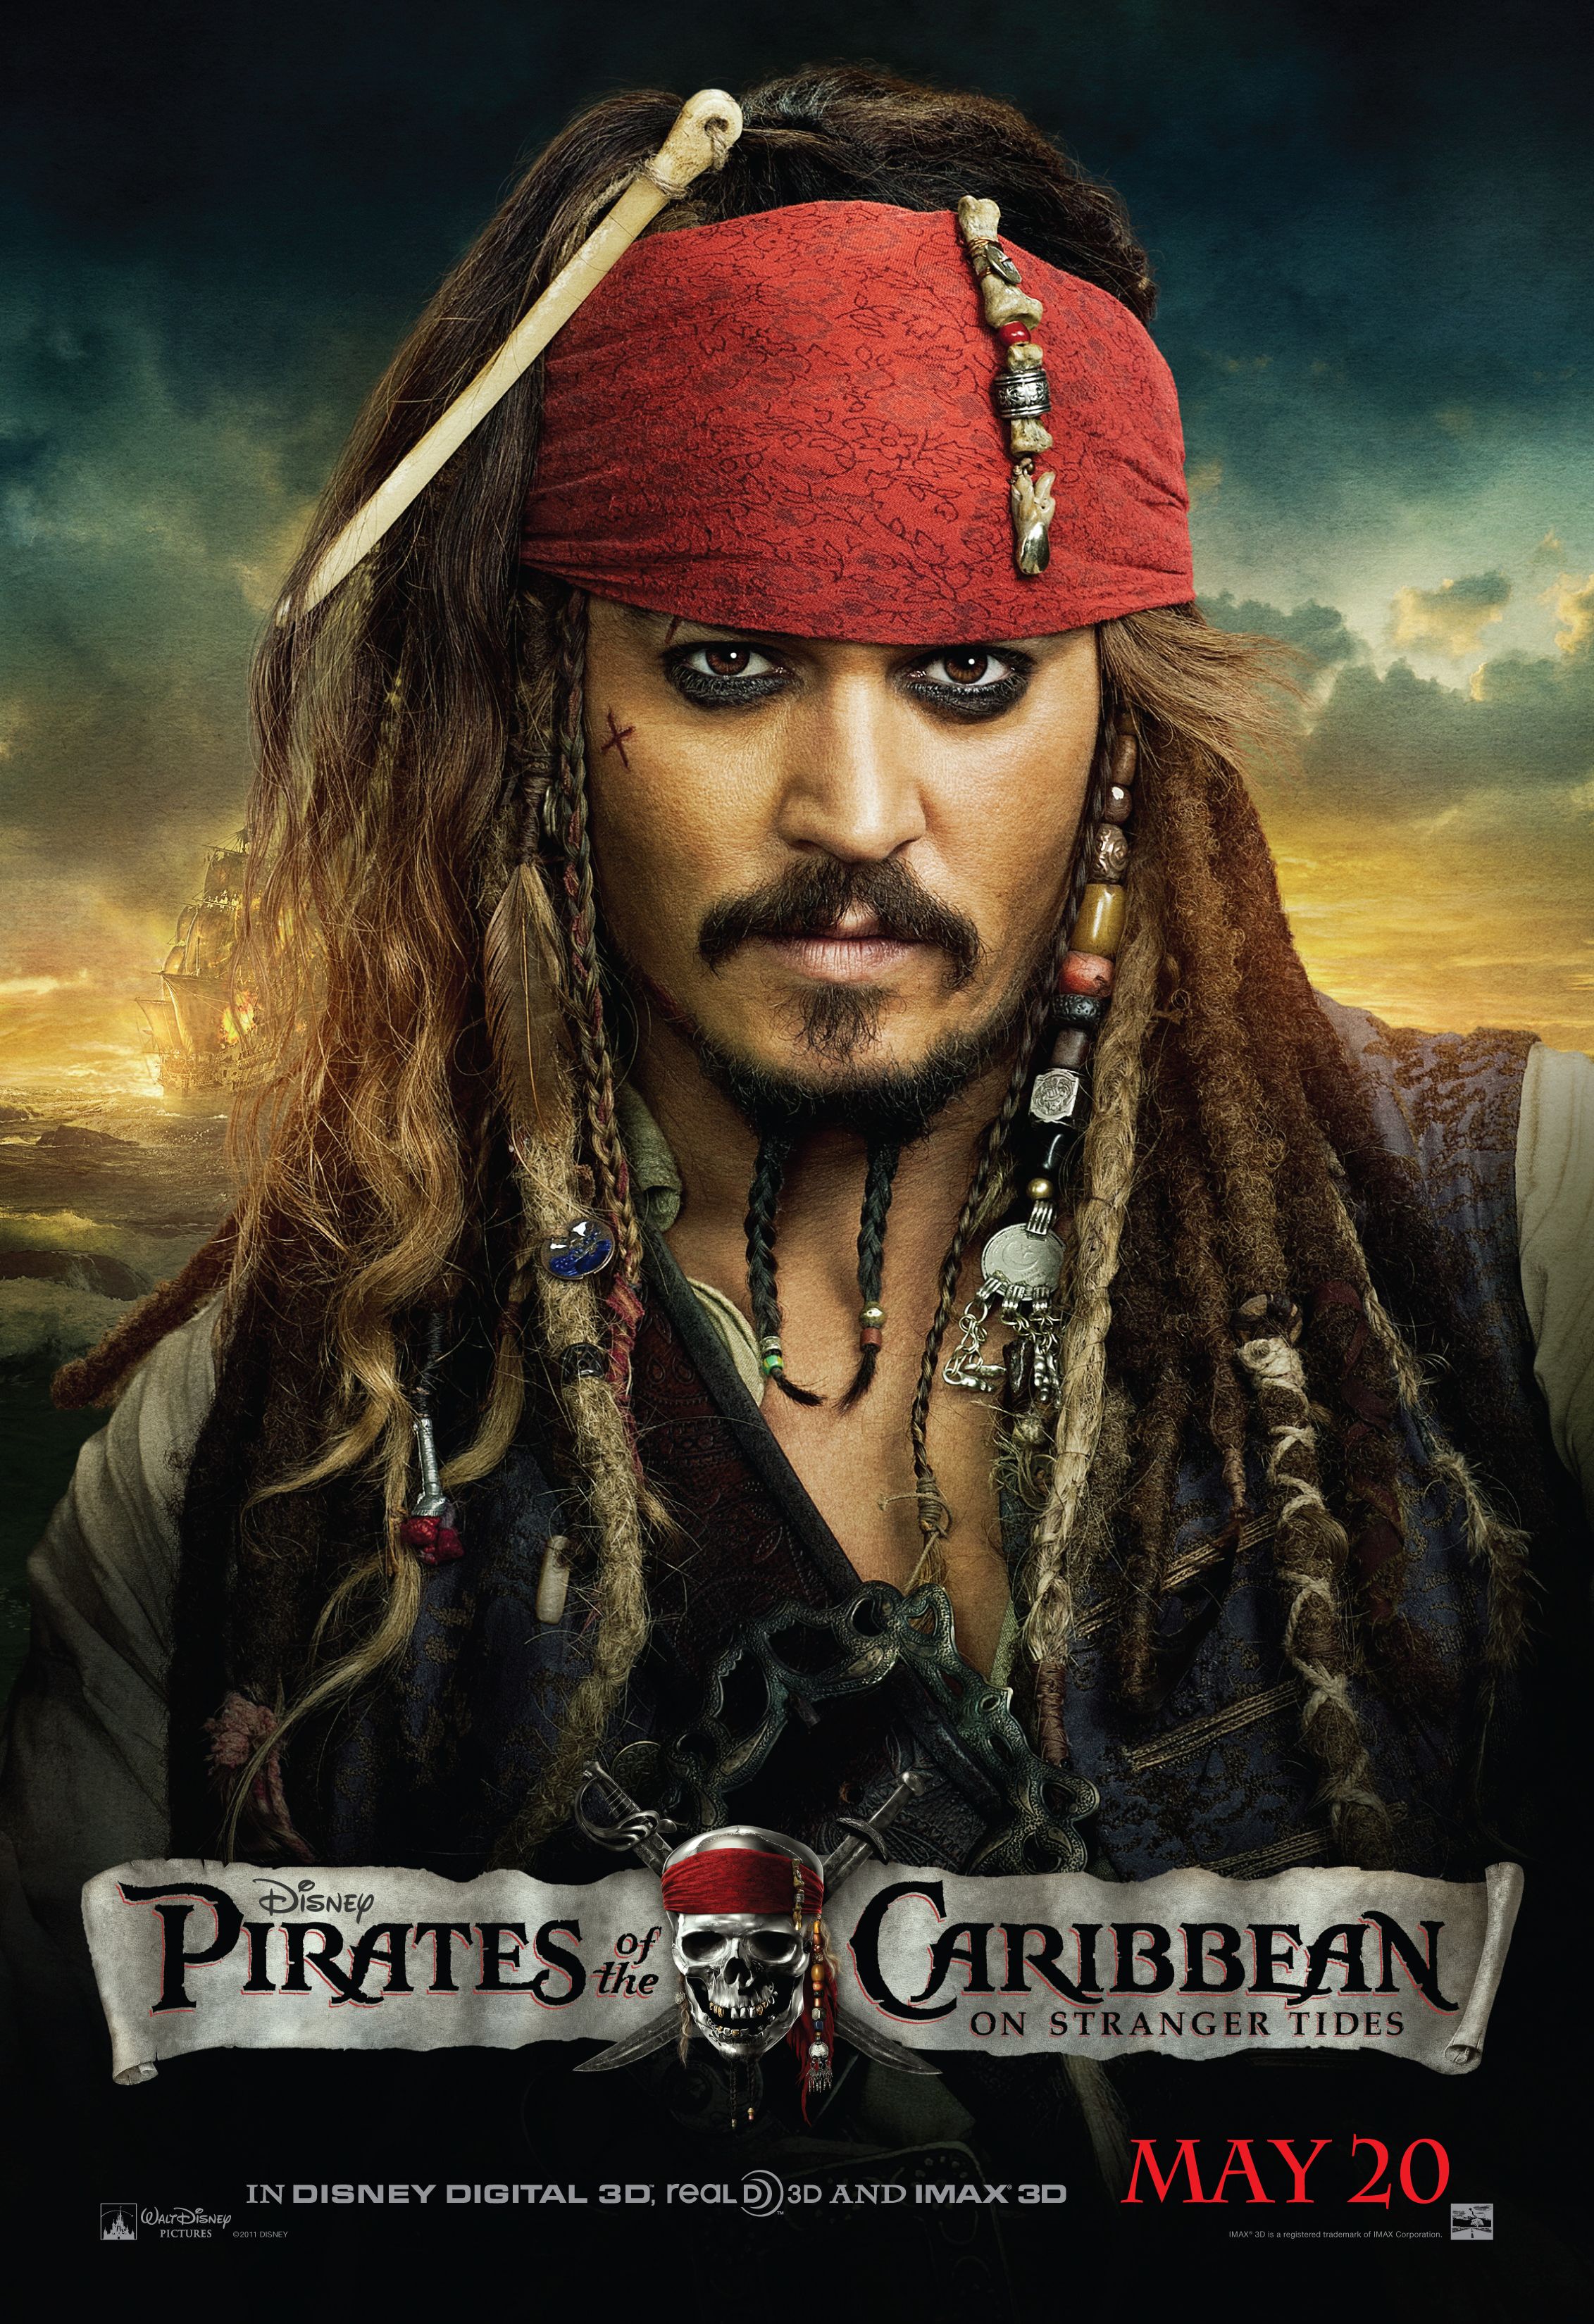 PIRATES OF THE CARIBBEAN: ON STRANGER TIDES Character Posters | Collider - What Is Pirates Of The Caribbean Streaming On